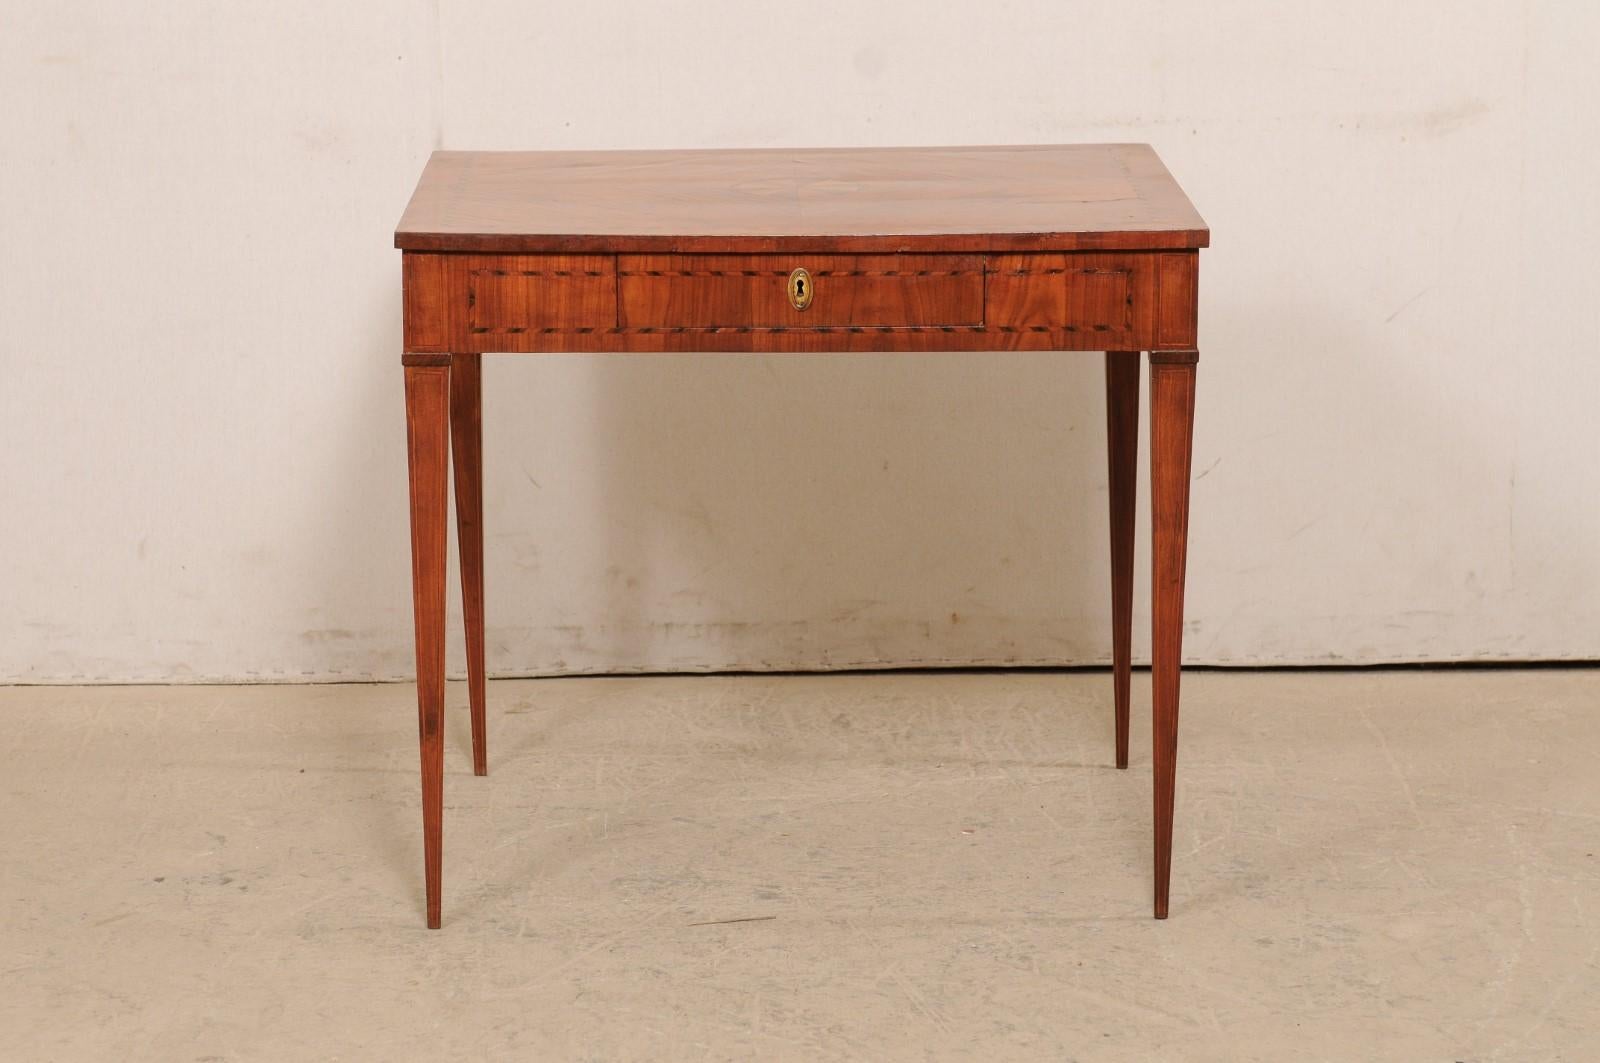 Italian Occasional Table with Floral Medallion Inlay Adorning Top, Early 19th C For Sale 6